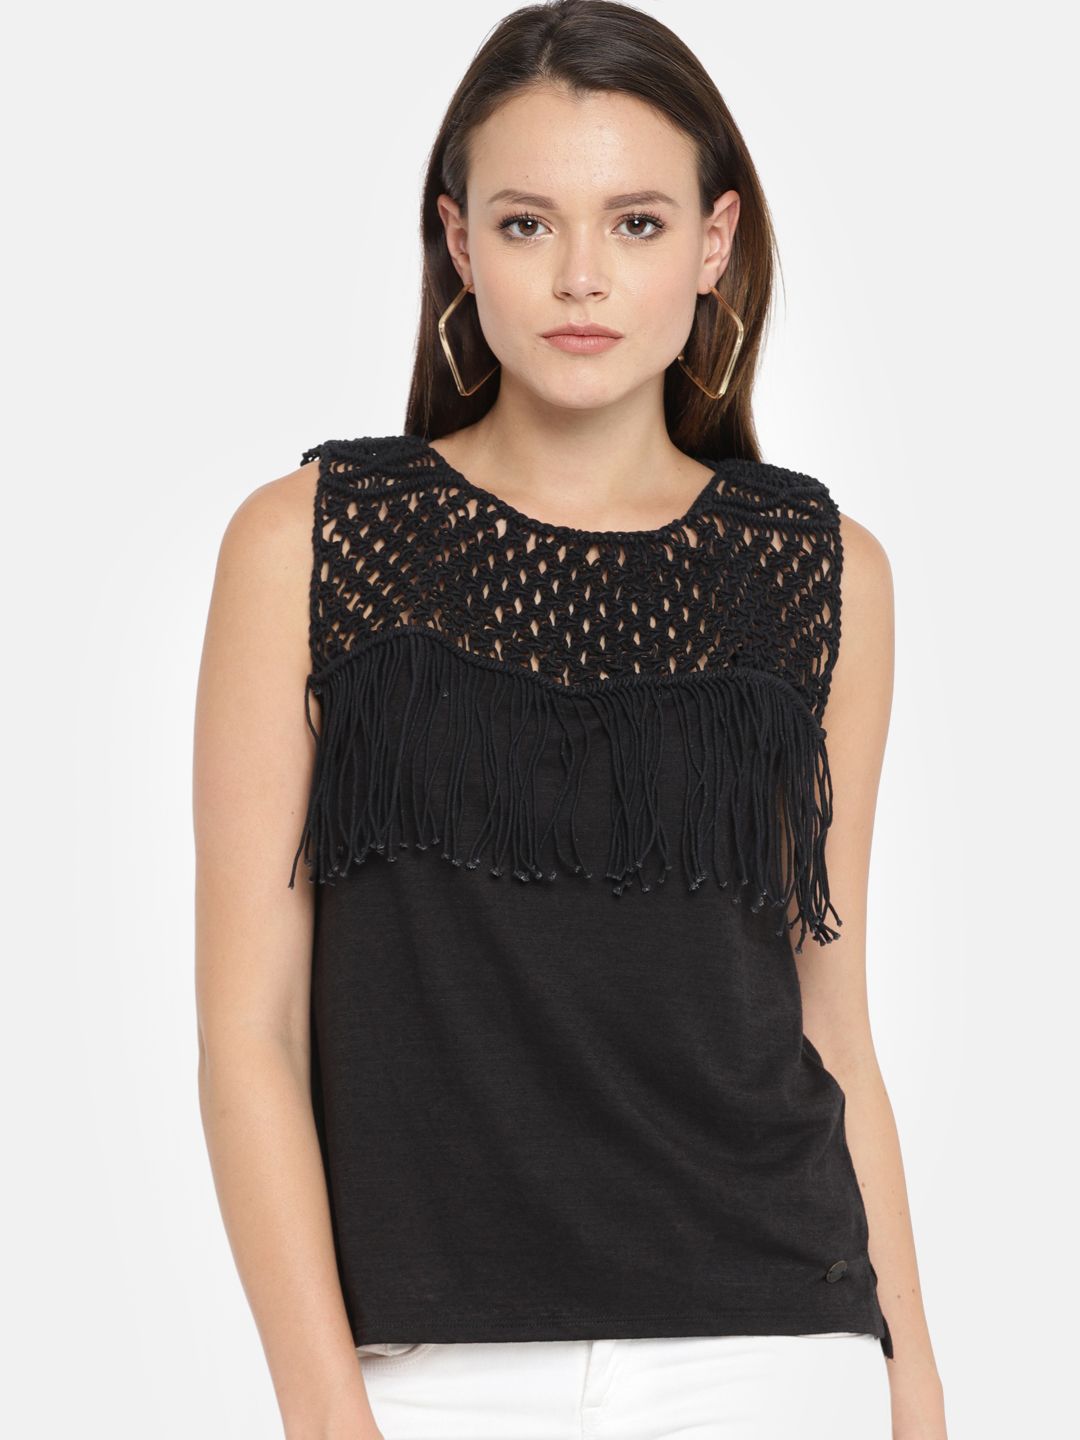 Pepe Jeans Women Black Self Design Knitted Top Price in India